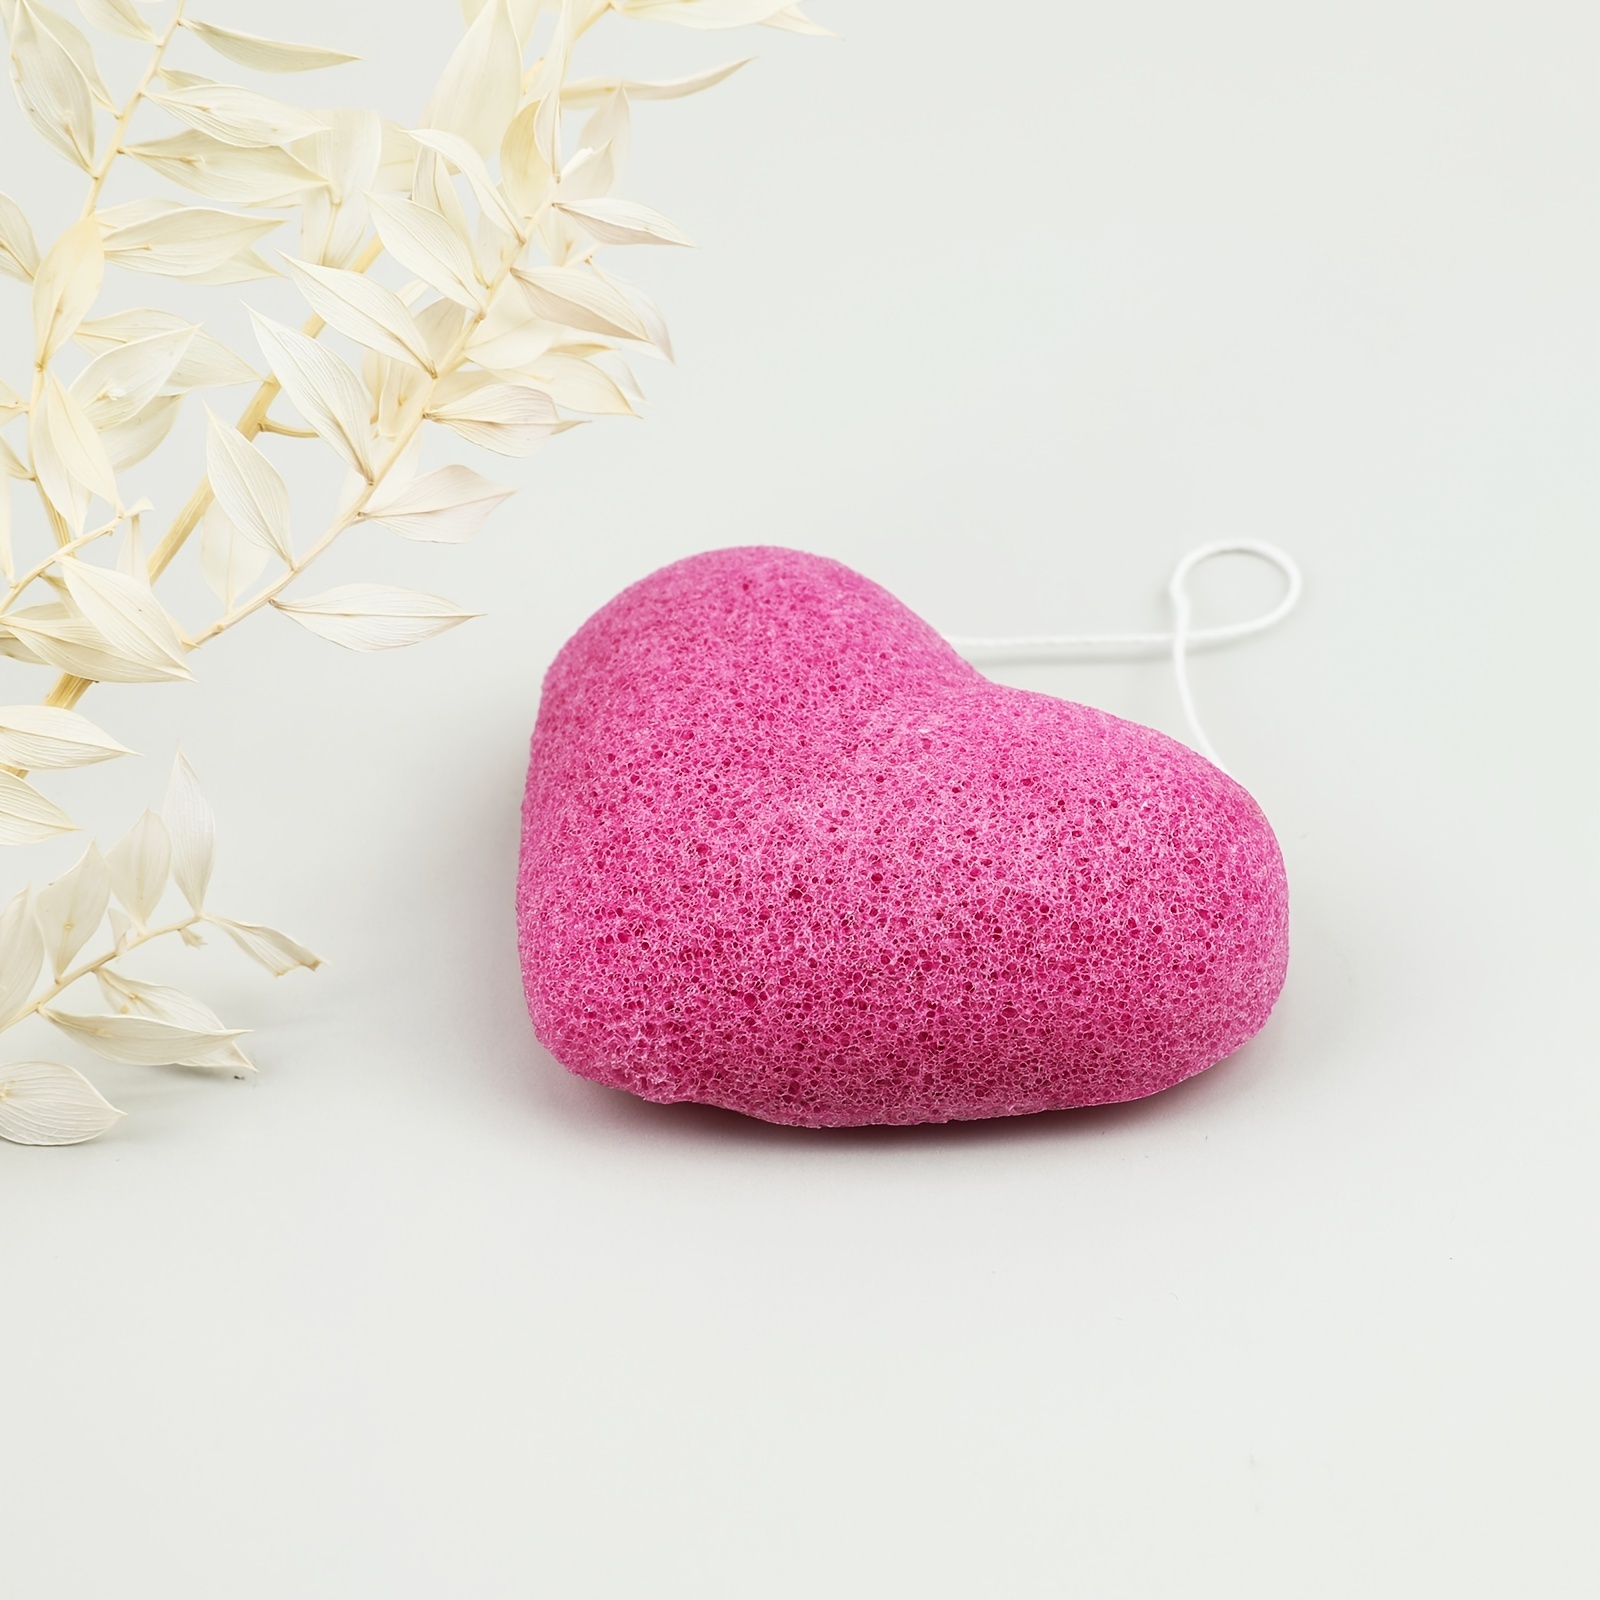 Heart-Shaped Facial Sponges - Natural Cellulose Sponge For Gentle  Exfoliation And Makeup Removal